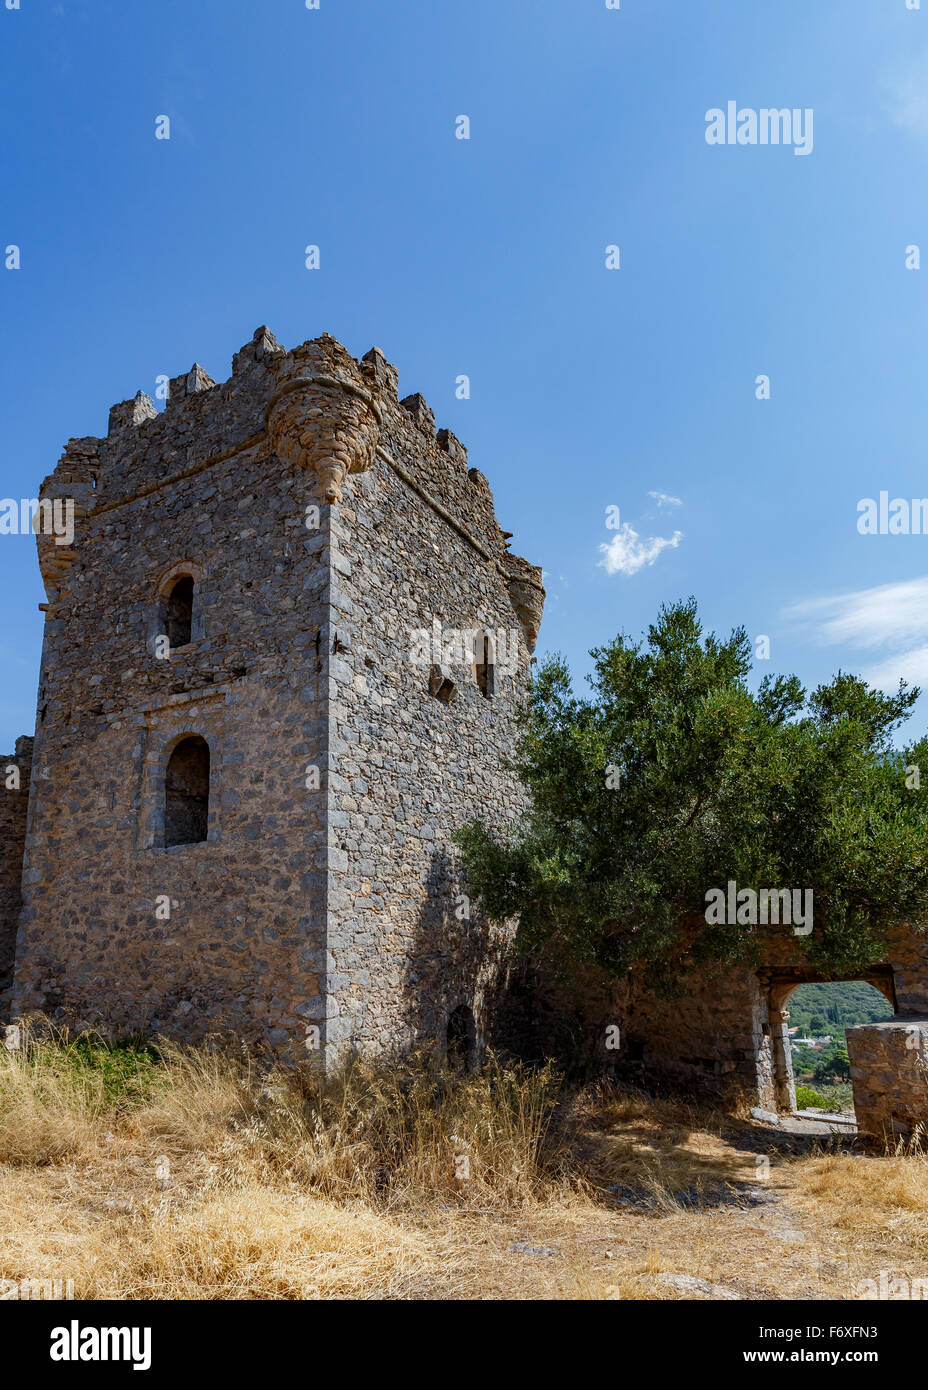 Old picturesque abandoned medieval tower at Messinian Mani in Greece against a blue sky Stock Photo